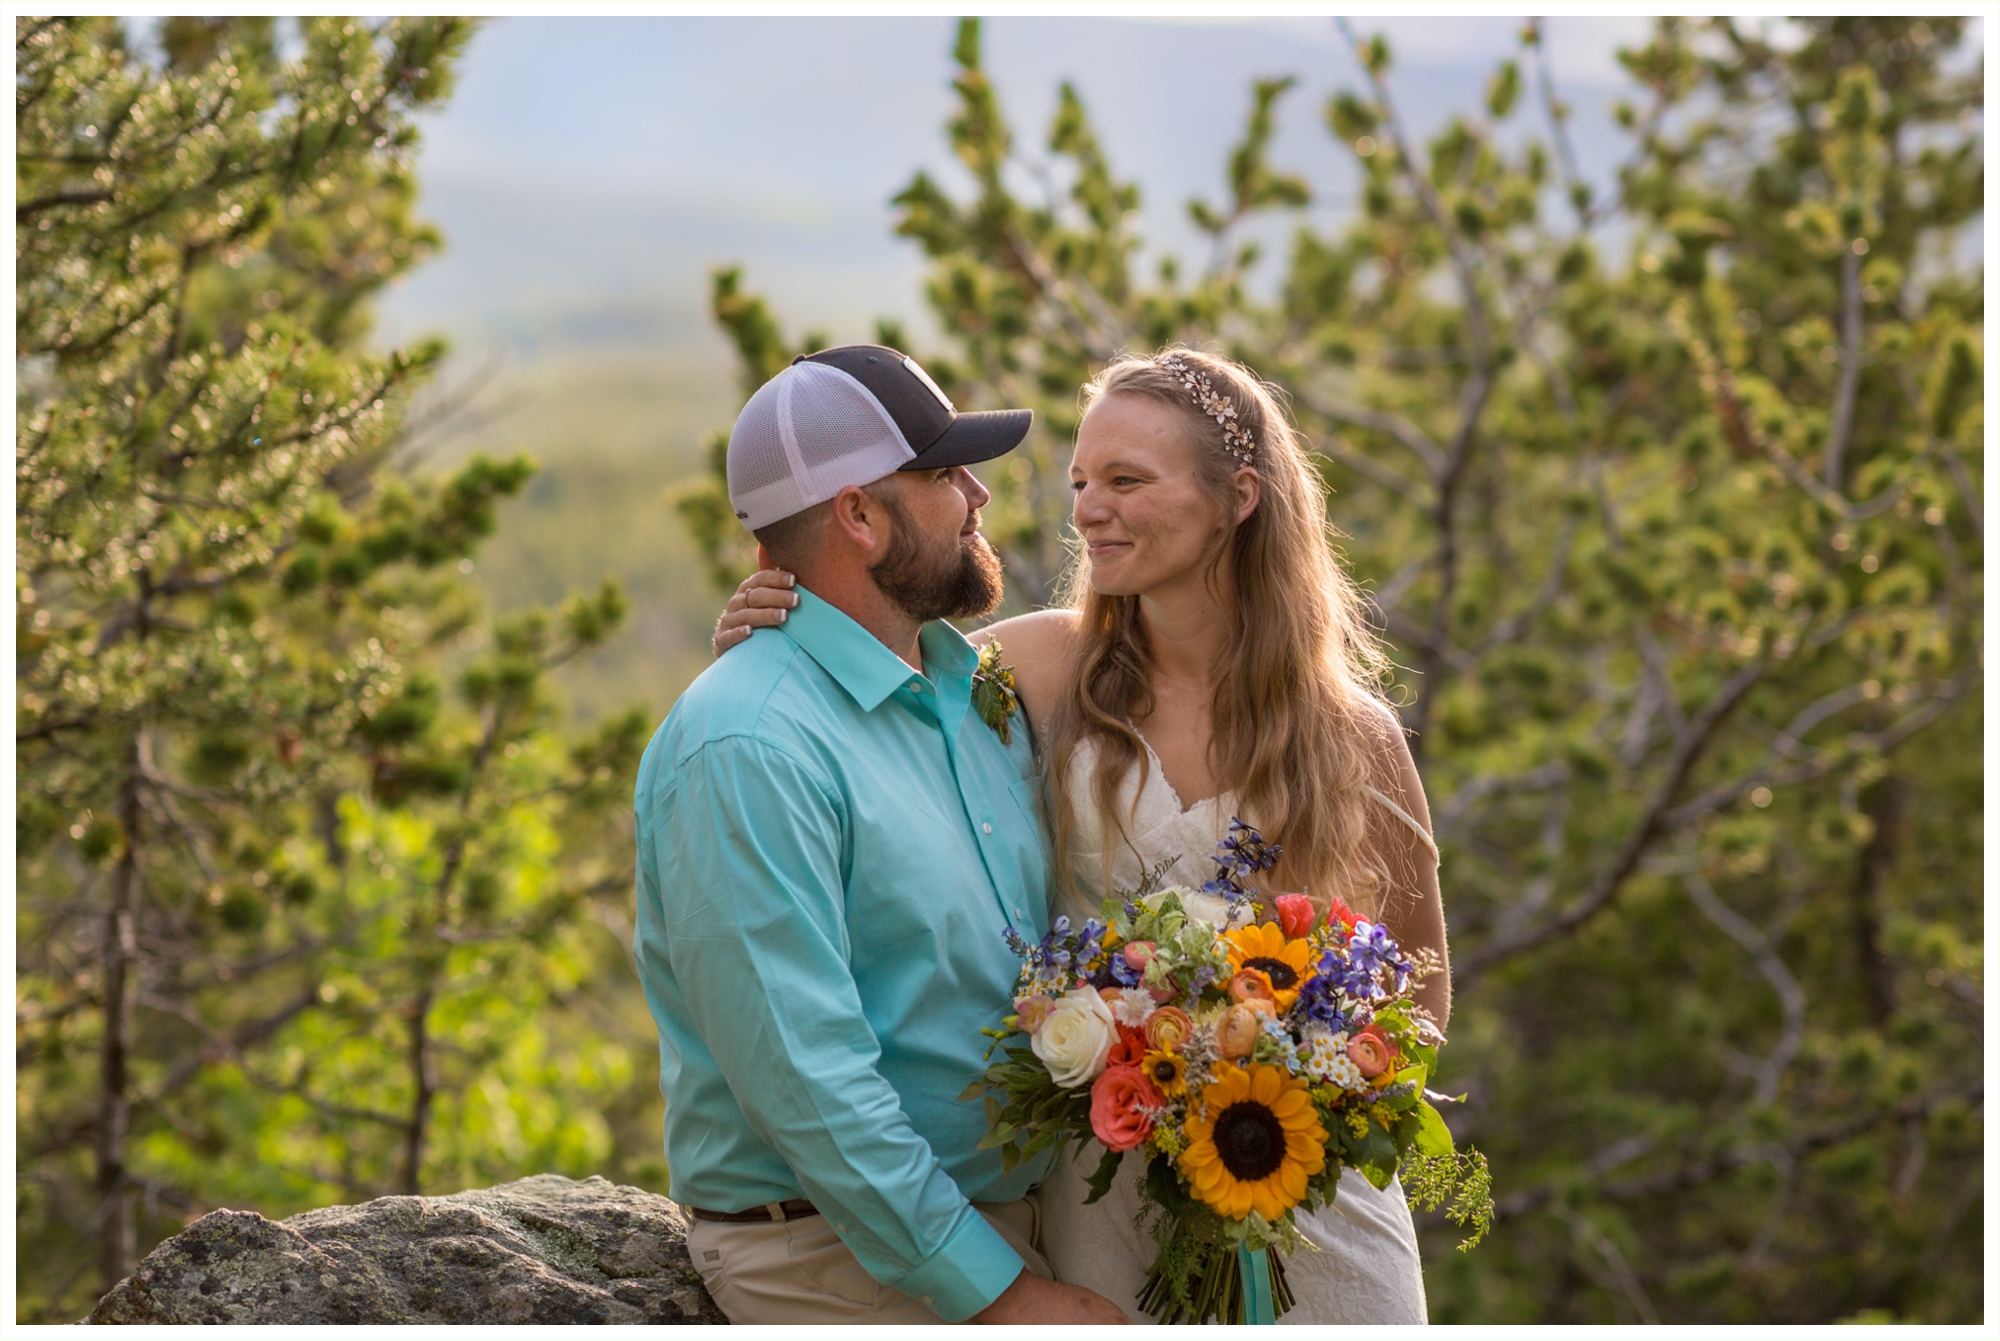 beautiful natural candid golden hour bride and groom portraits at golden gate canyon state park elopement by colorado mountain wedding photographer